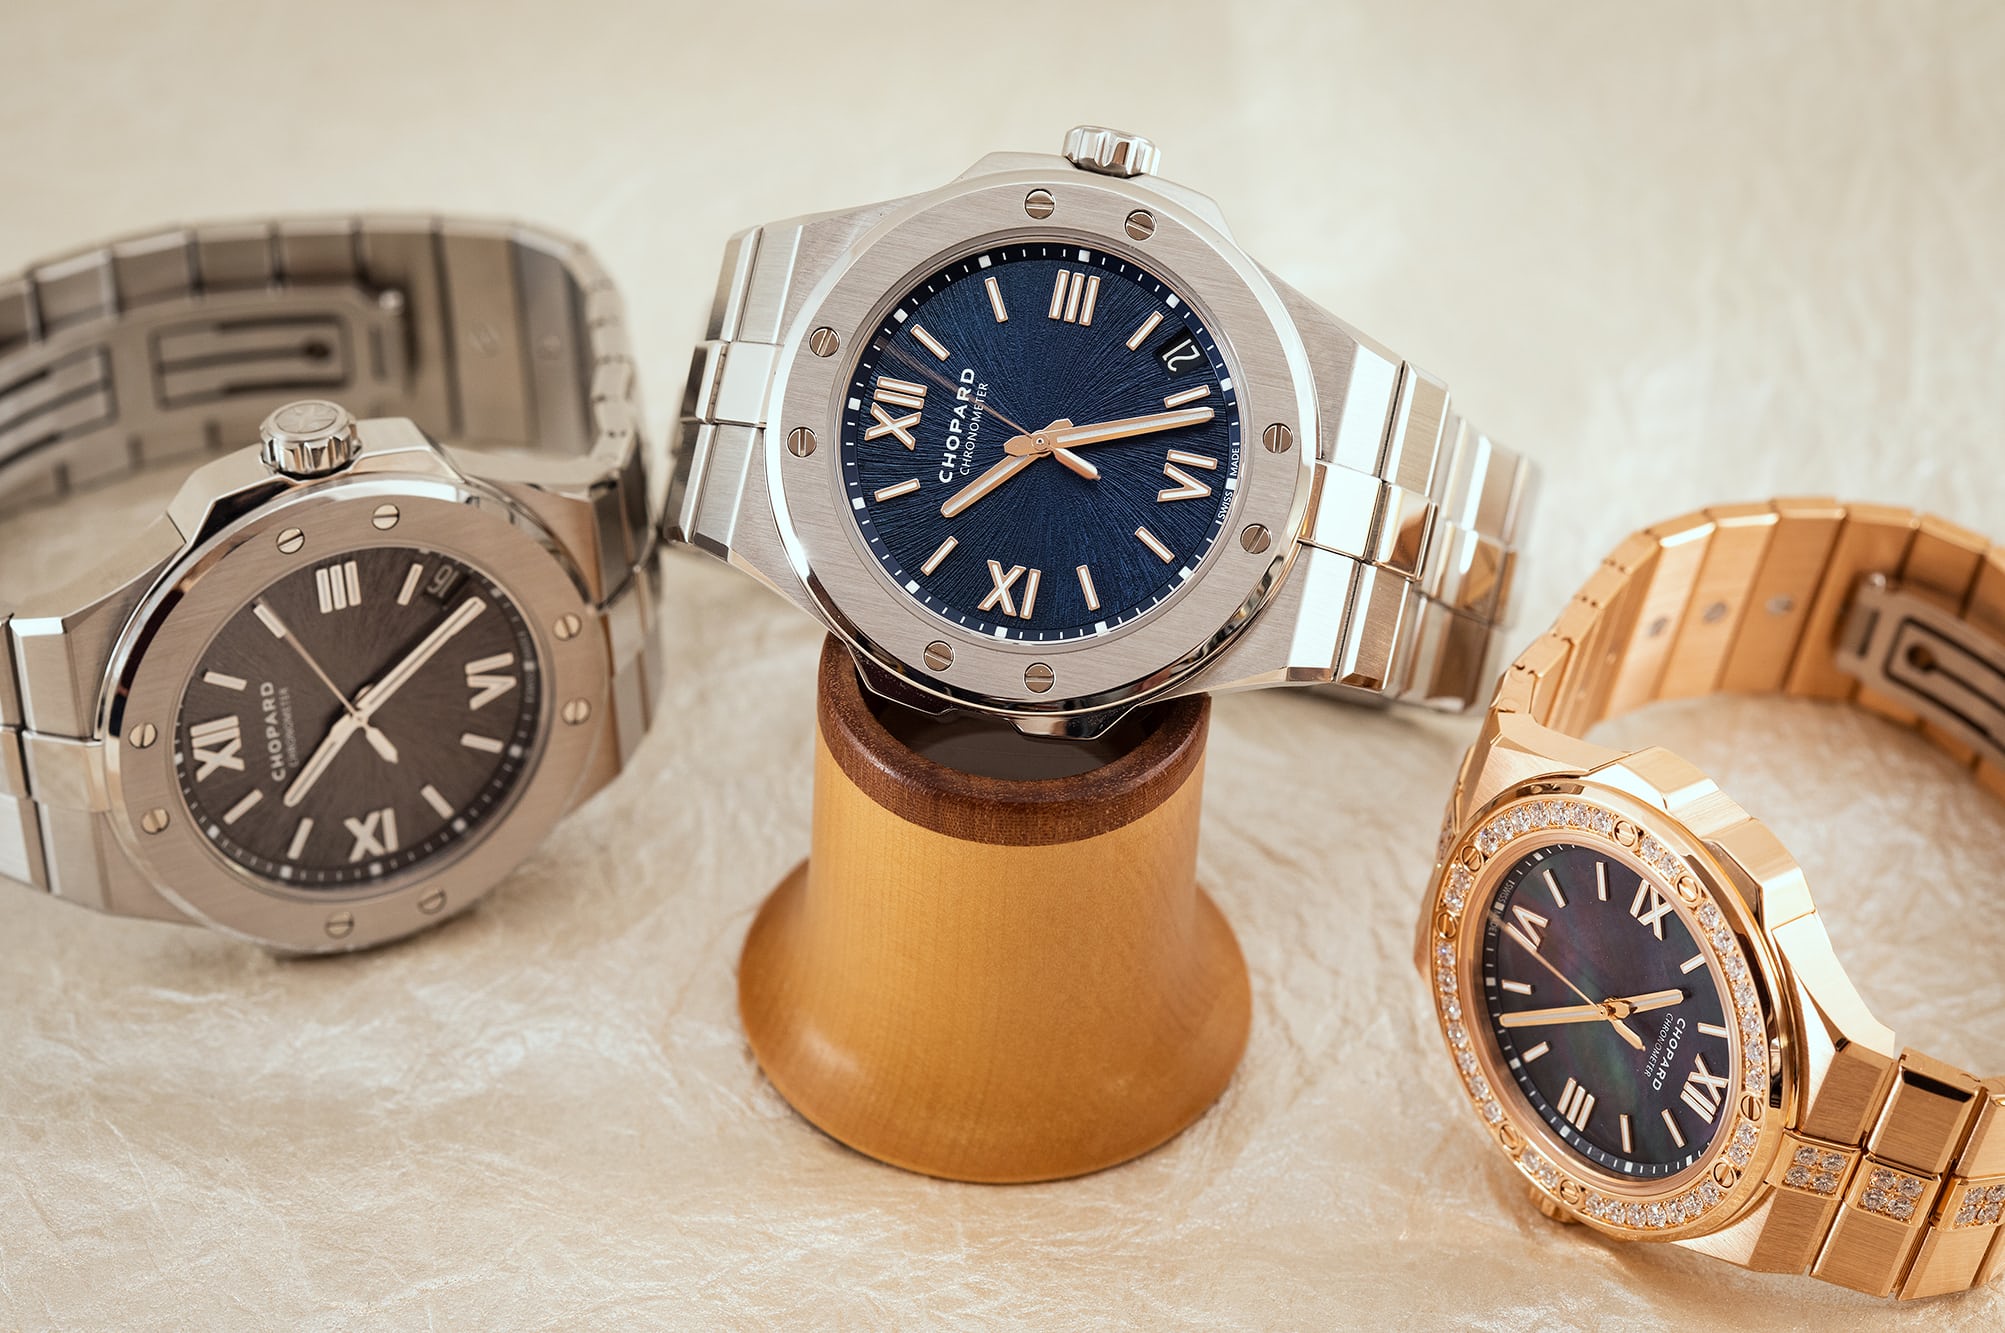 Chopard Alpine Eagle Watch Collection World Debut, Page 3 of 3